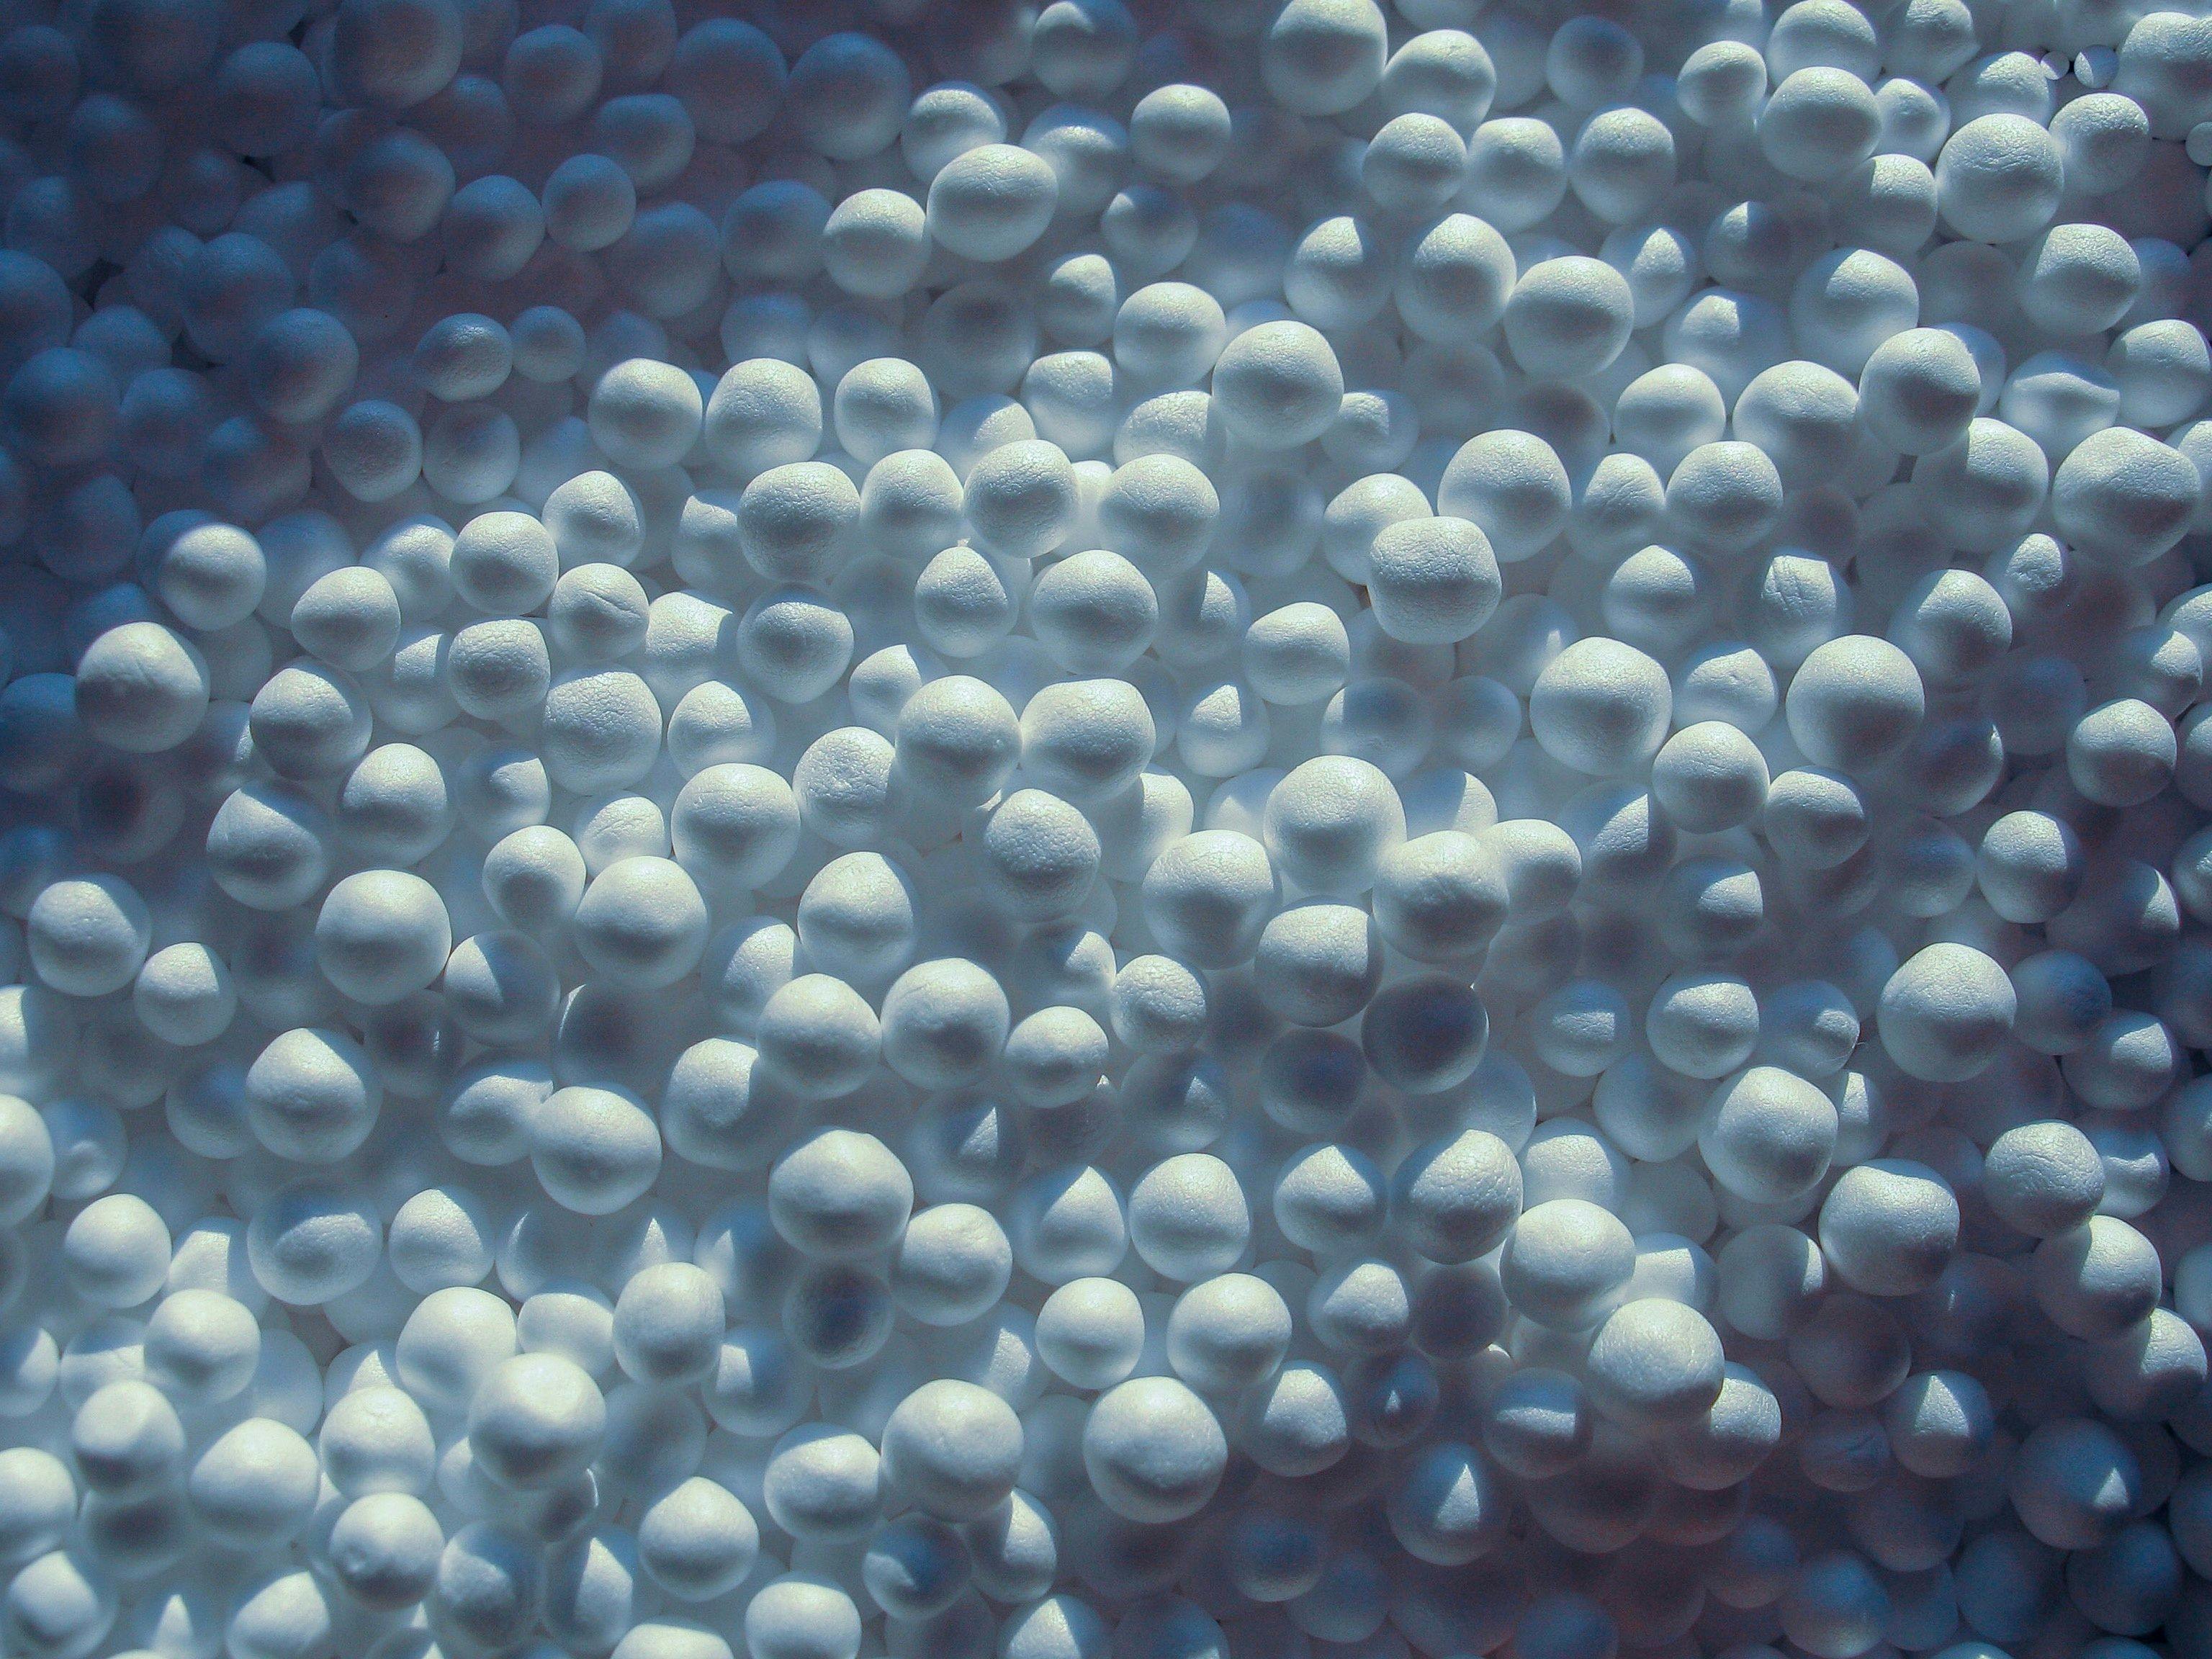 zoomed white expanded polystyrene pellets for production plastic bags | Image Credit: © Maryna - stock.adobe.com